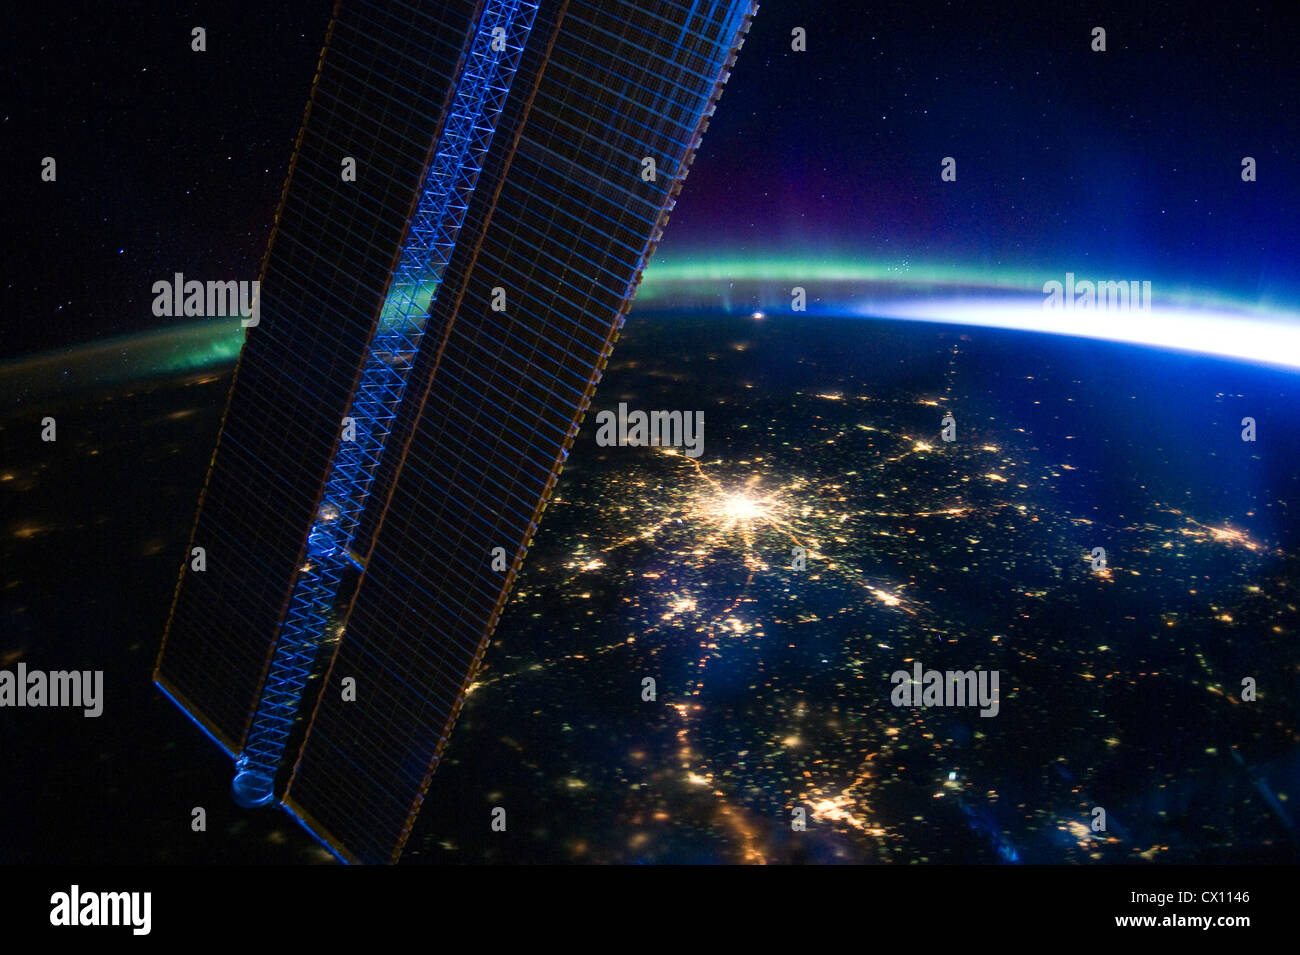 Moscow at nighttime viewed from space with Aurora Borealis visible. Stock Photo